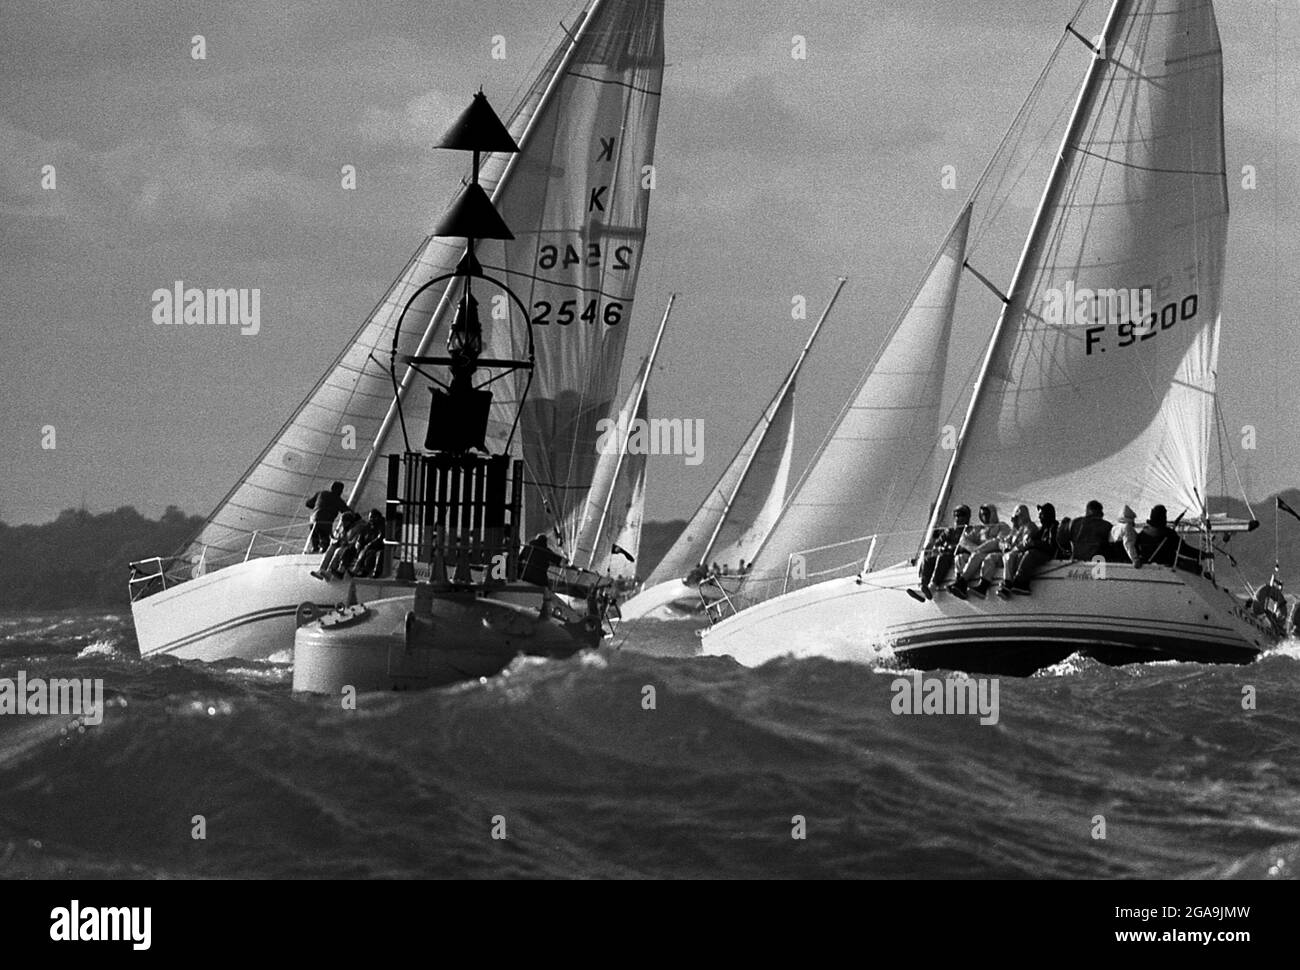 AJAXNETPHOTO. 1985. SOLENT, ENGLAND. - FASTNET RACE START - YACHT SIDEWINDER IN ROUGH WEATHER AT THE START. PHOTO:JONATHAN EASTLAND/AJAX REF:FNTR85 35A 93 Stock Photo